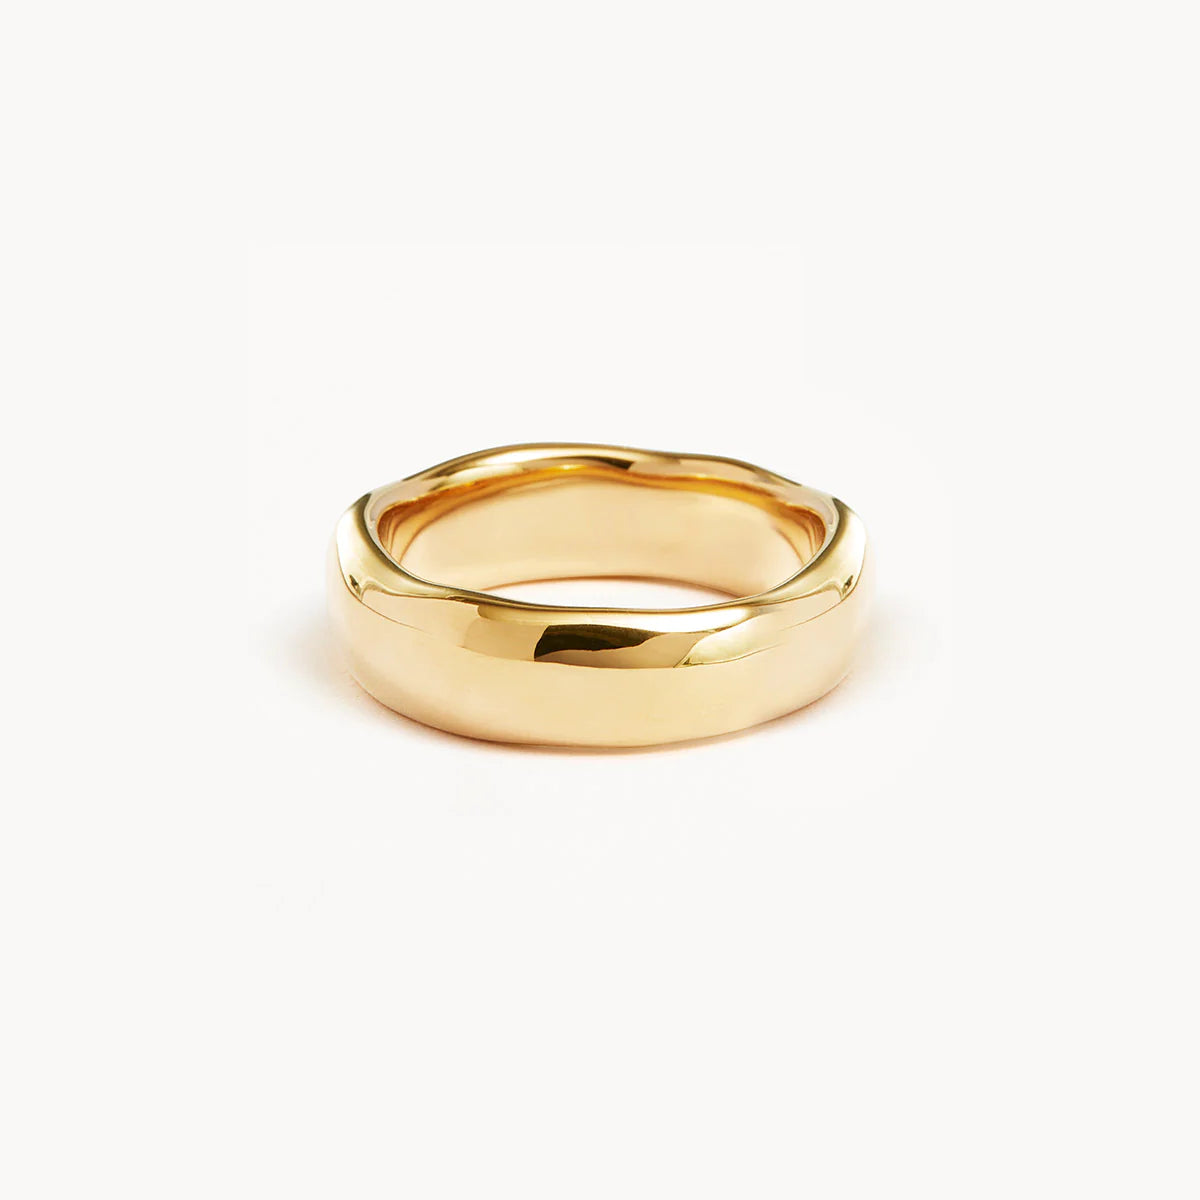 BY CHARLOTTE | LOVER BOLD RING